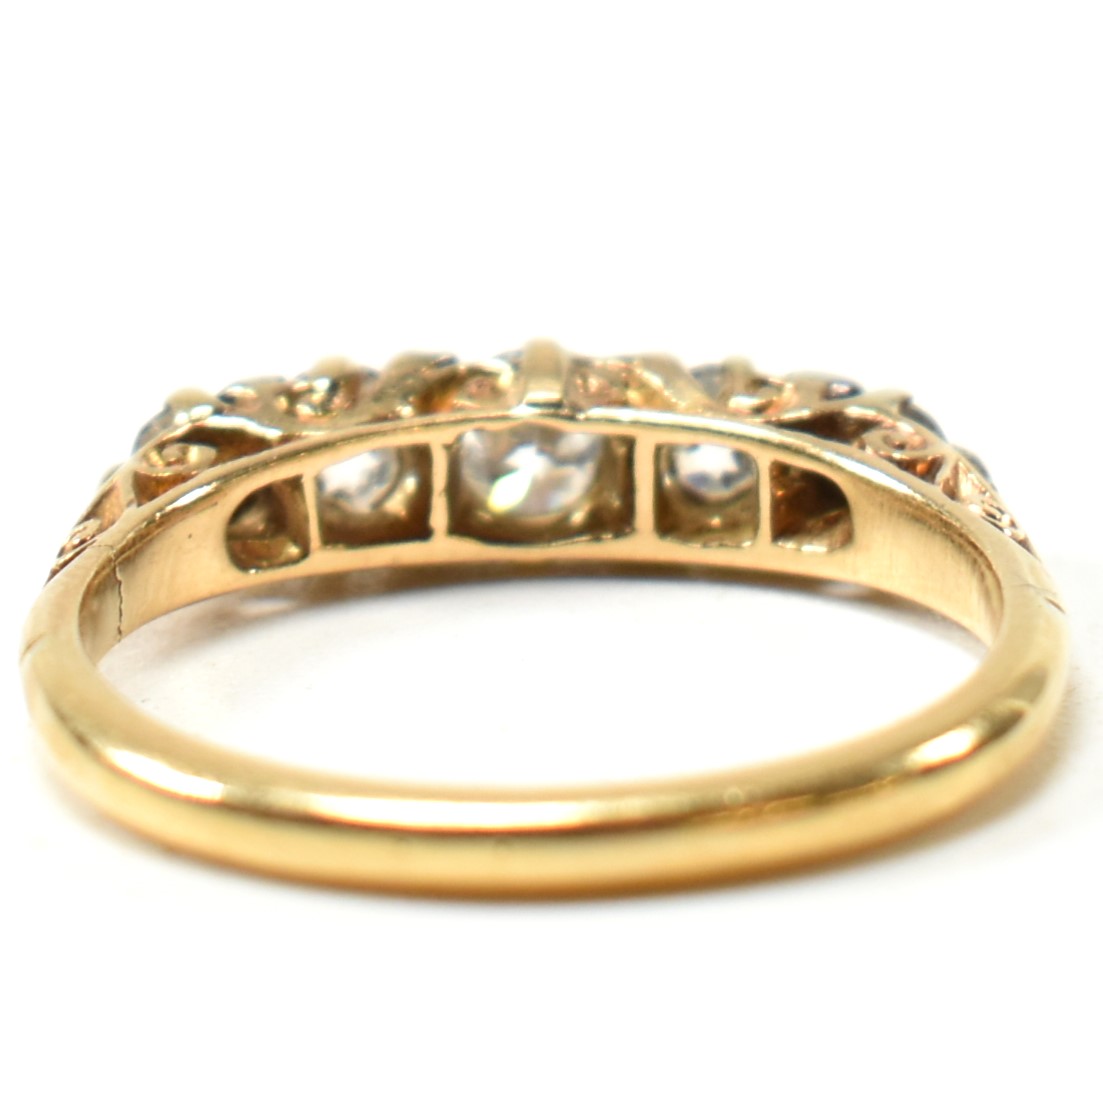 18CT GOLD & DIAMOND FIVE STONE RING - Image 7 of 8